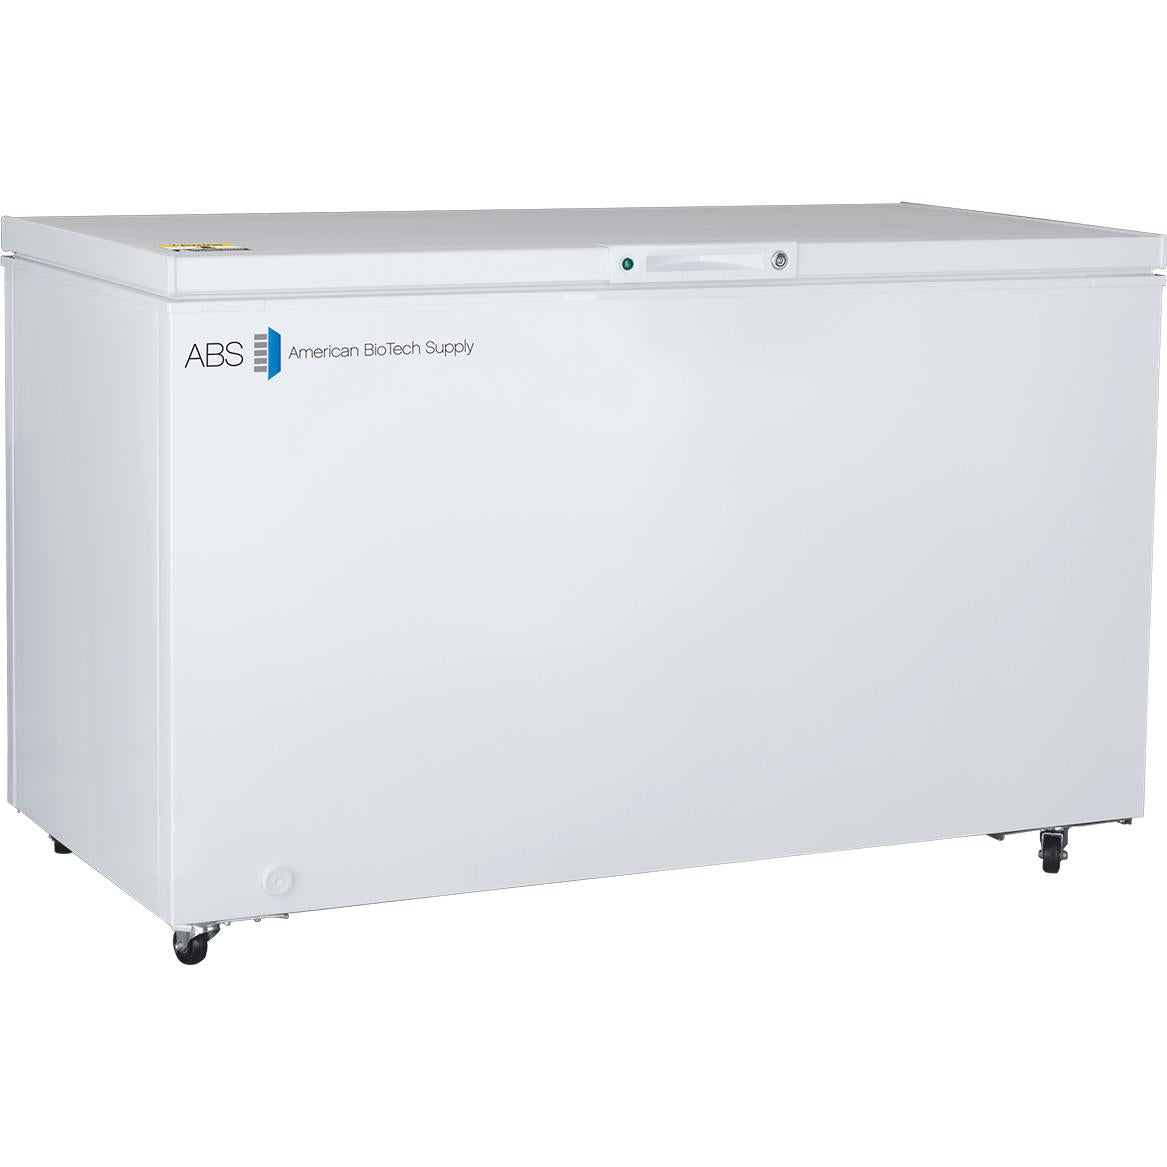 ABS Standard Manual Defrost Chest Freezers